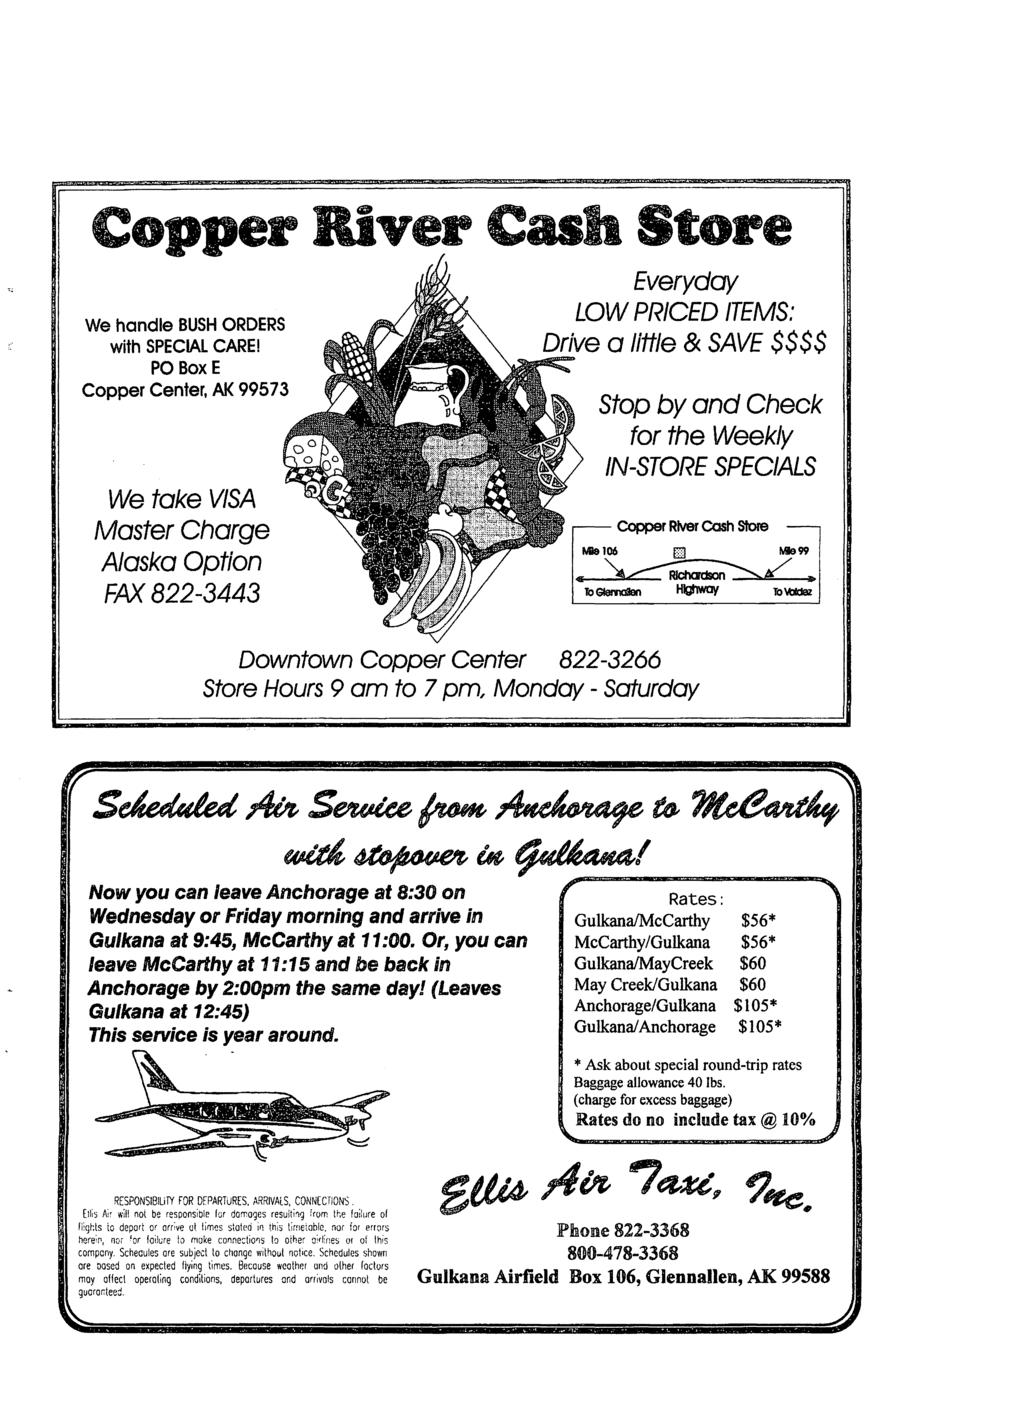 Copper River Cas Store We handle BUSH ORDERS with SPECIAL CARE!